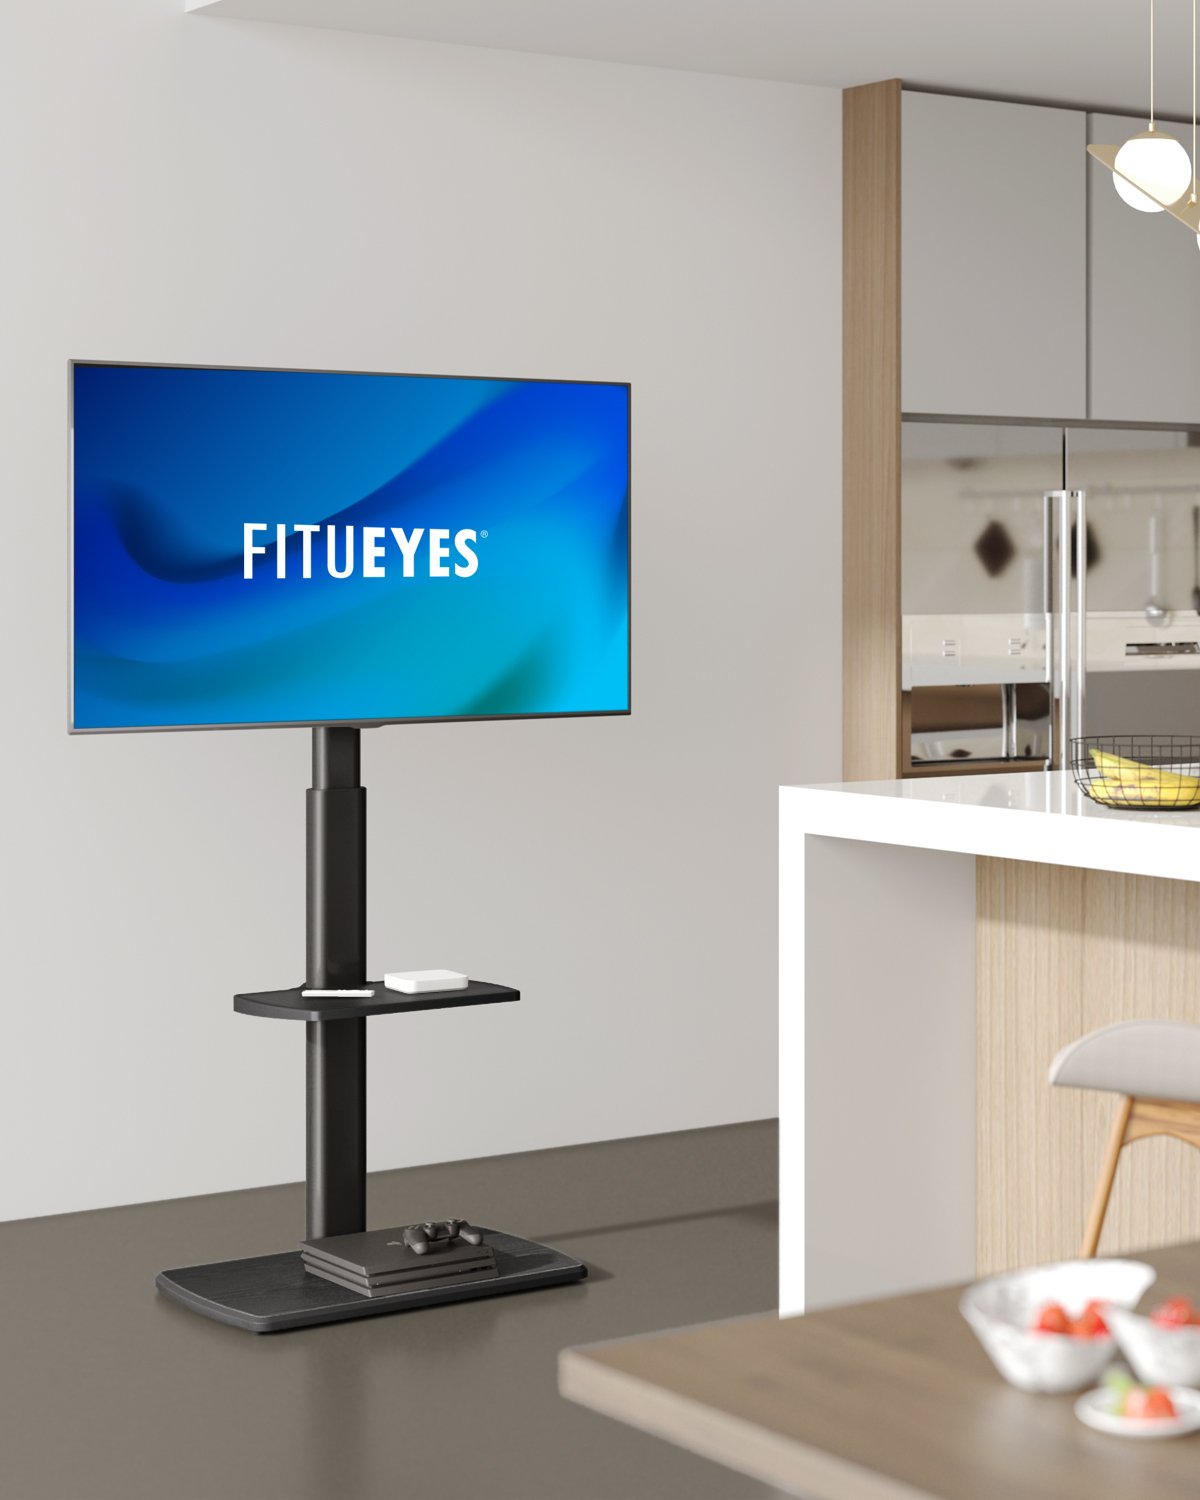 Floor TV Stand with Shelf E Series 32-65 Inch